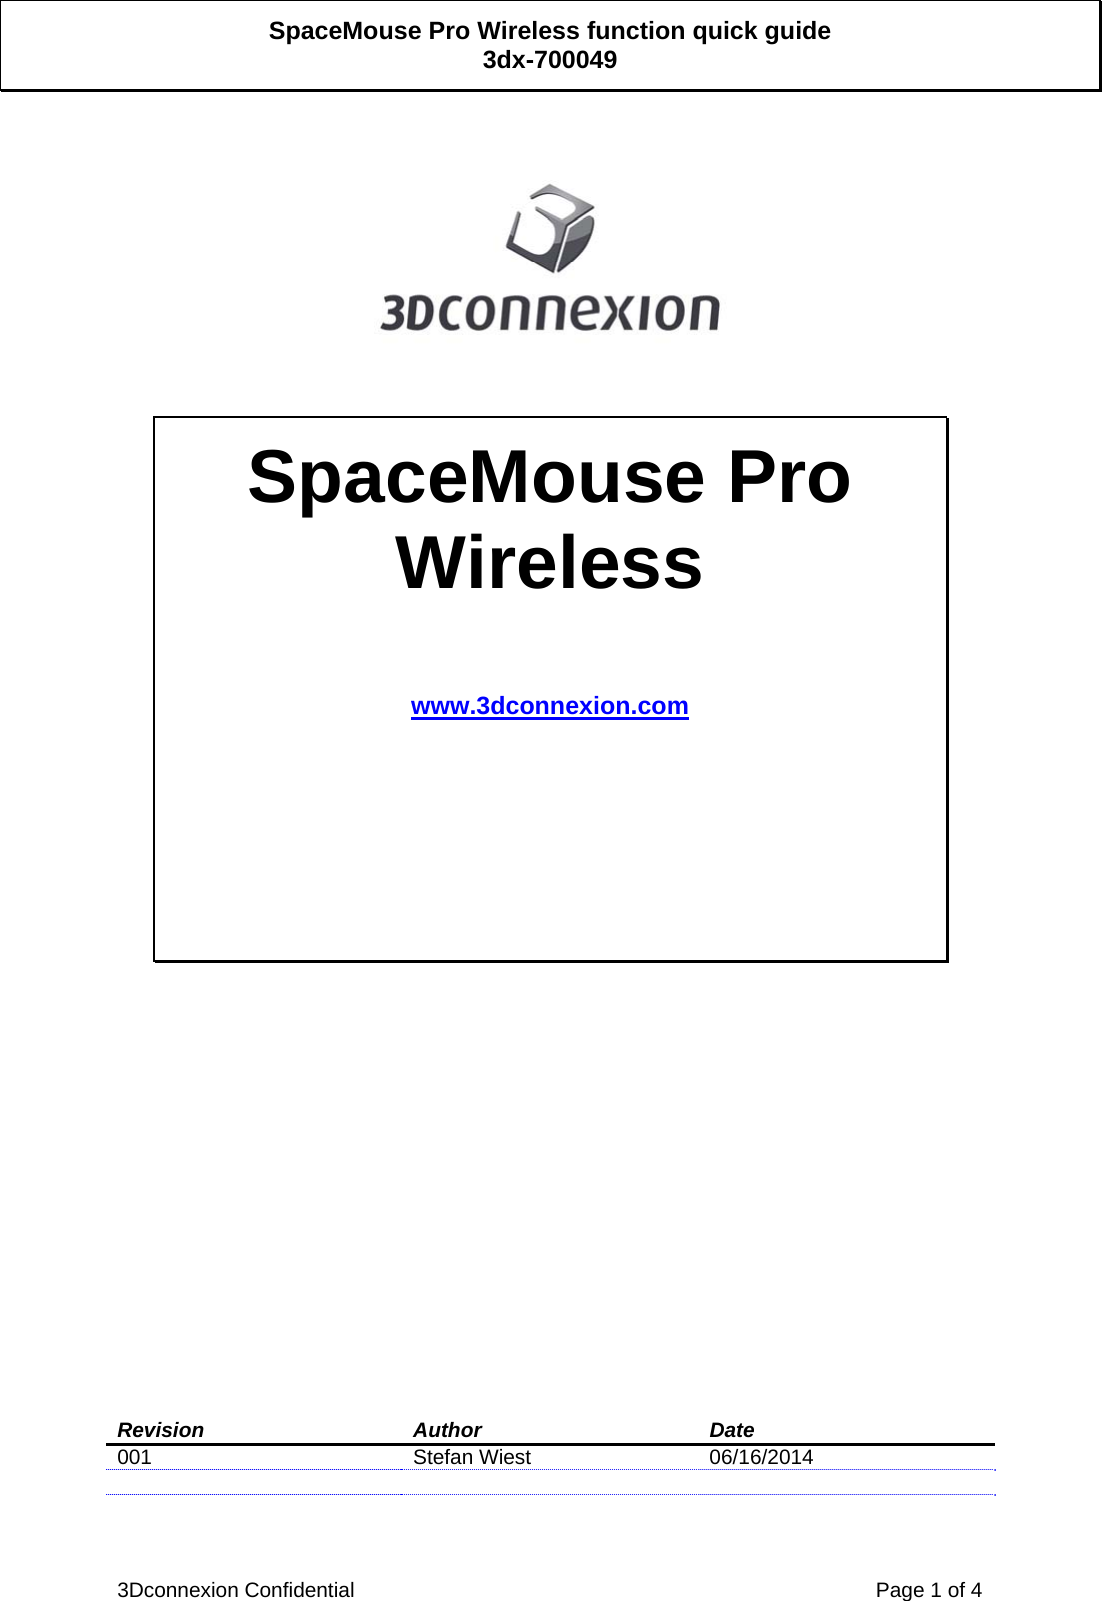  3Dconnexion Confidential    Page 1 of 4 SpaceMouse Pro Wireless function quick guide 3dx-700049                          Revision Author  Date 001 Stefan Wiest 06/16/2014       SpaceMouse Pro Wireless   www.3dconnexion.com 